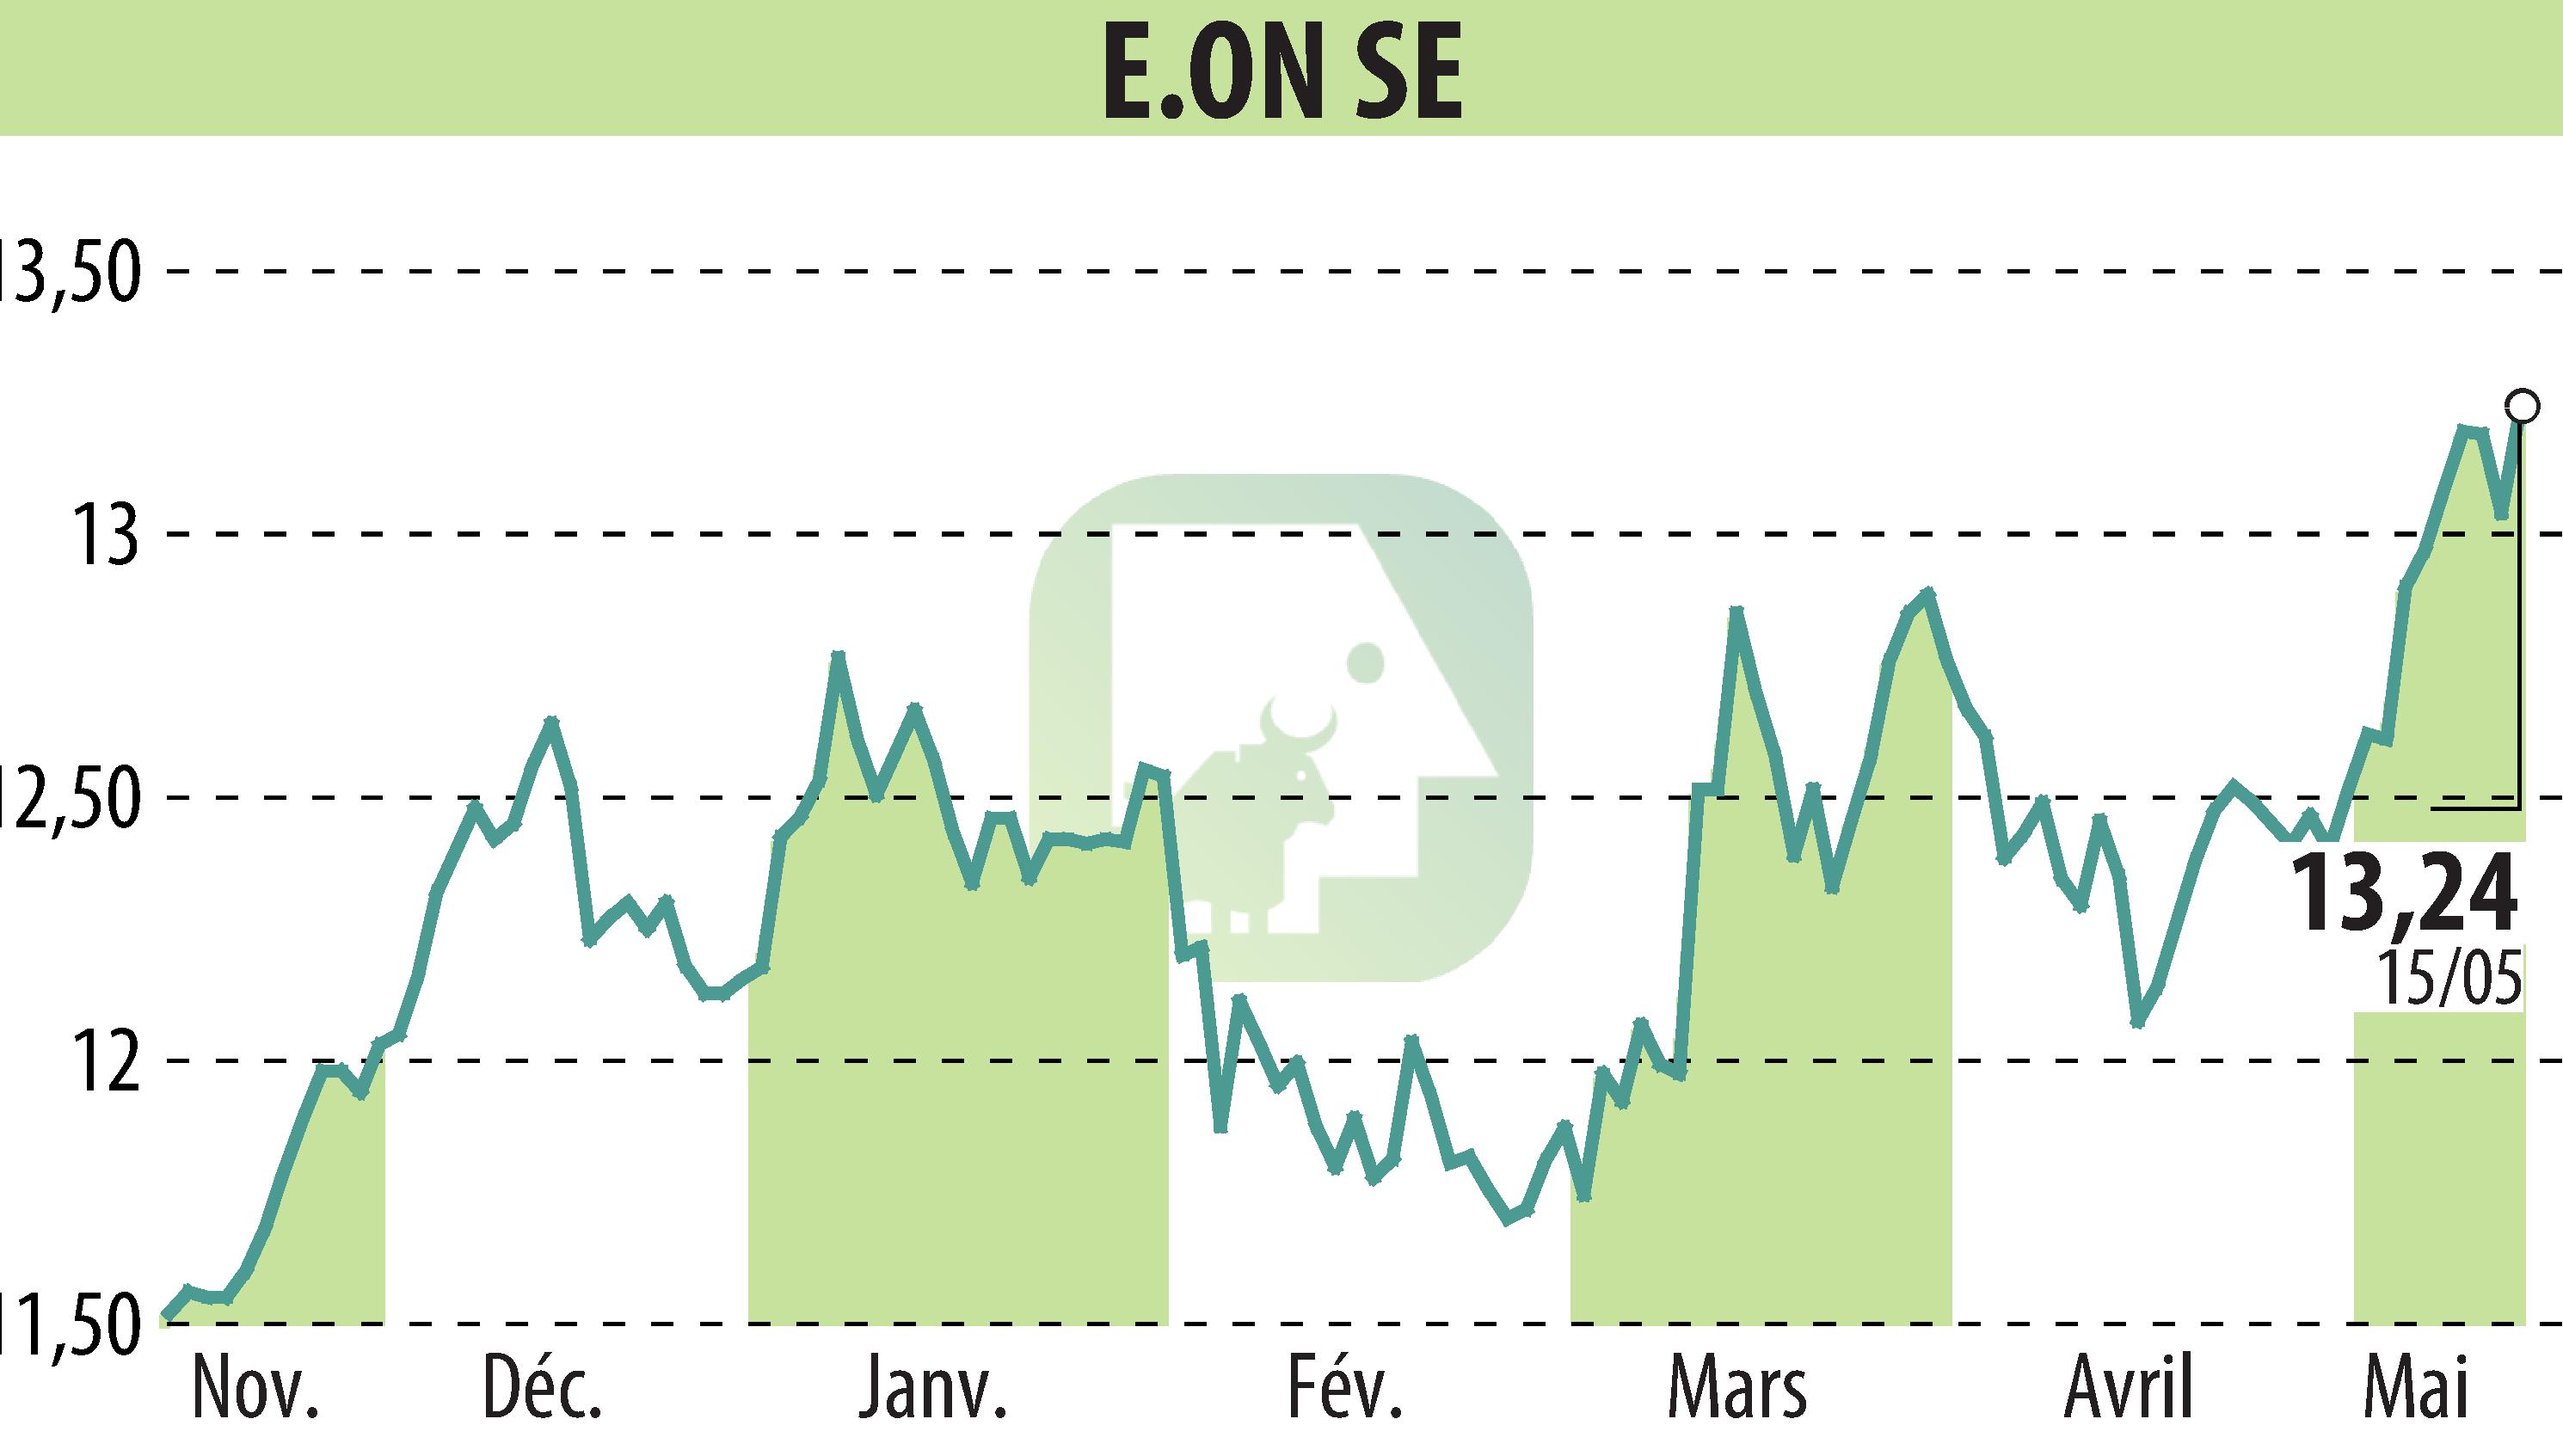 Stock price chart of E.ON SE (EBR:EOAN) showing fluctuations.